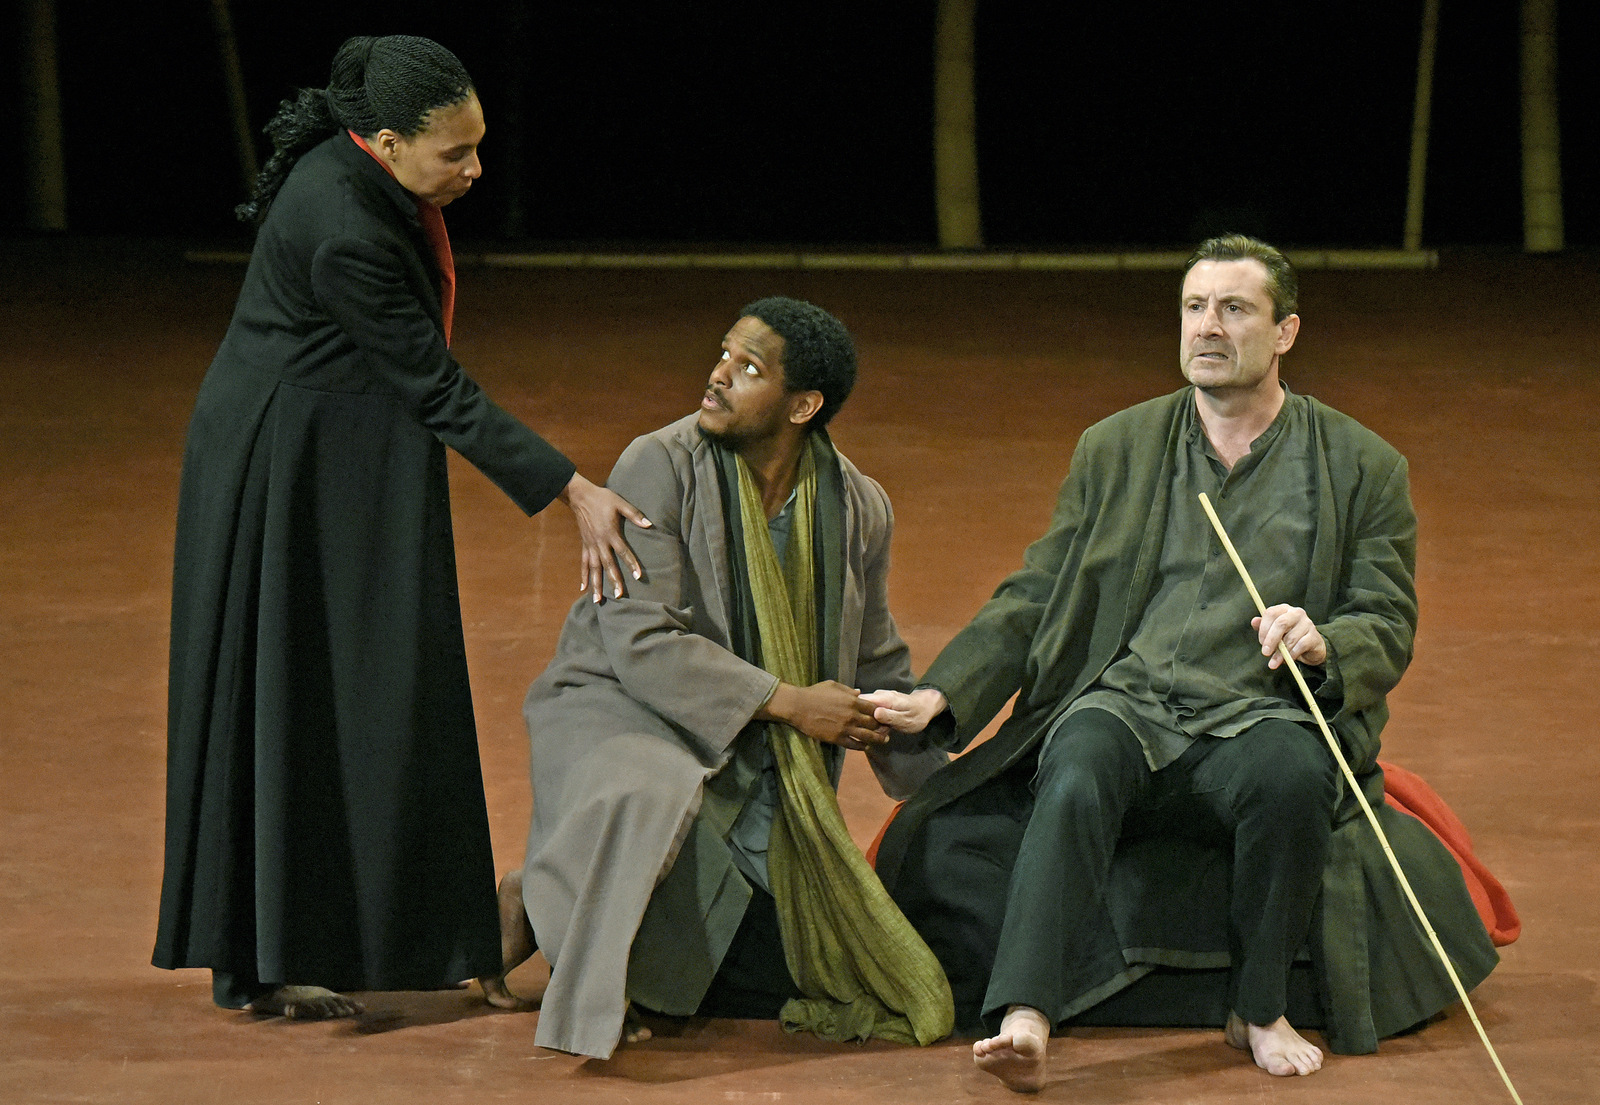 Battlefield. Directed by Peter Brook. Pictured: Karen Aldridge, Jared McNeill and Sean O'Callaghan. Photo credit: Kevin Parry for The Wallis.